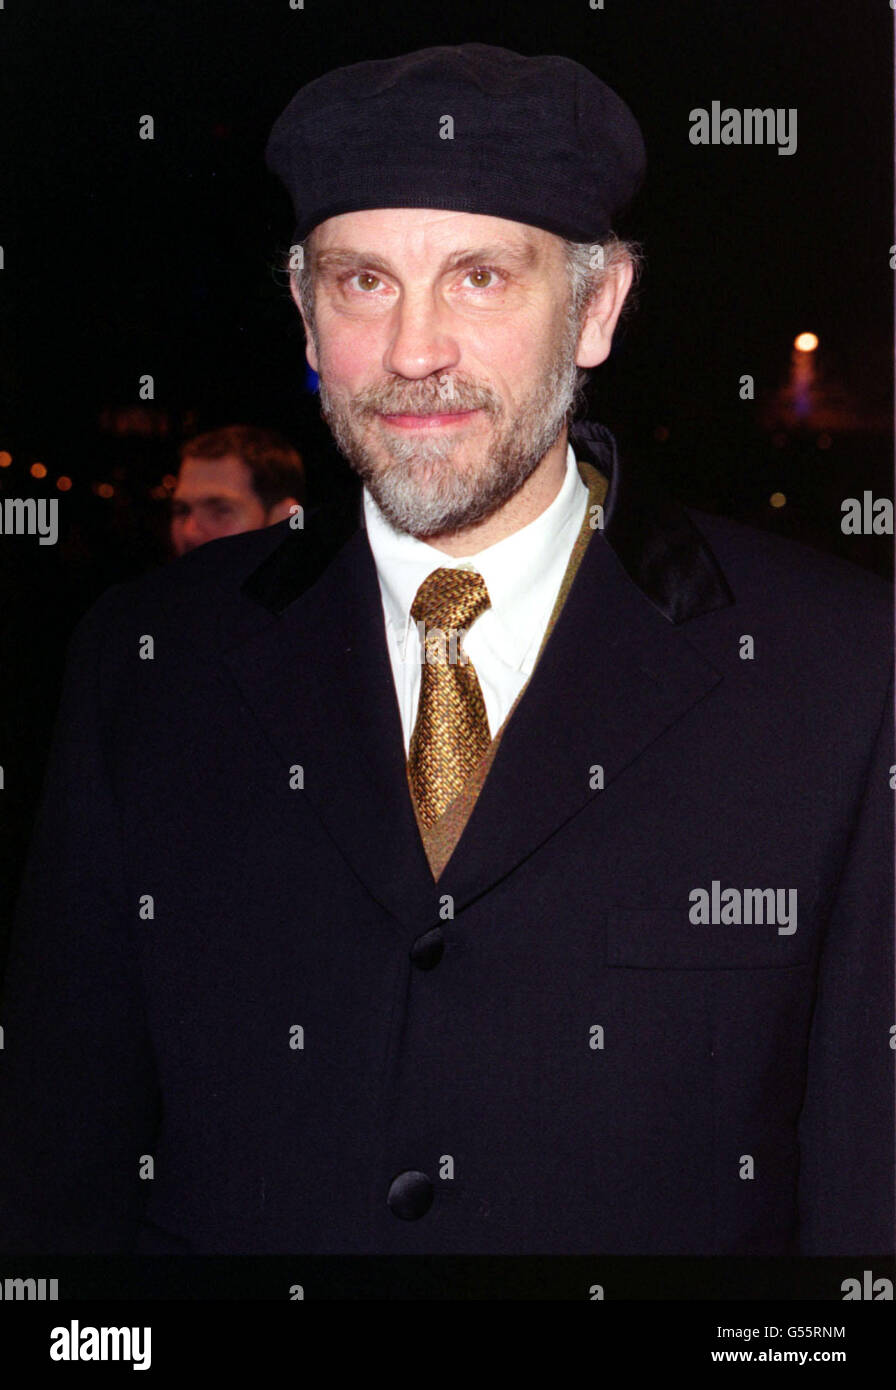 American actor John Malkovich, one of the stars of 'Shadow of the Vampire', arrives for the film's premiere, which is part of the London Film Festival, at the Odeon West End cinema. Stock Photo